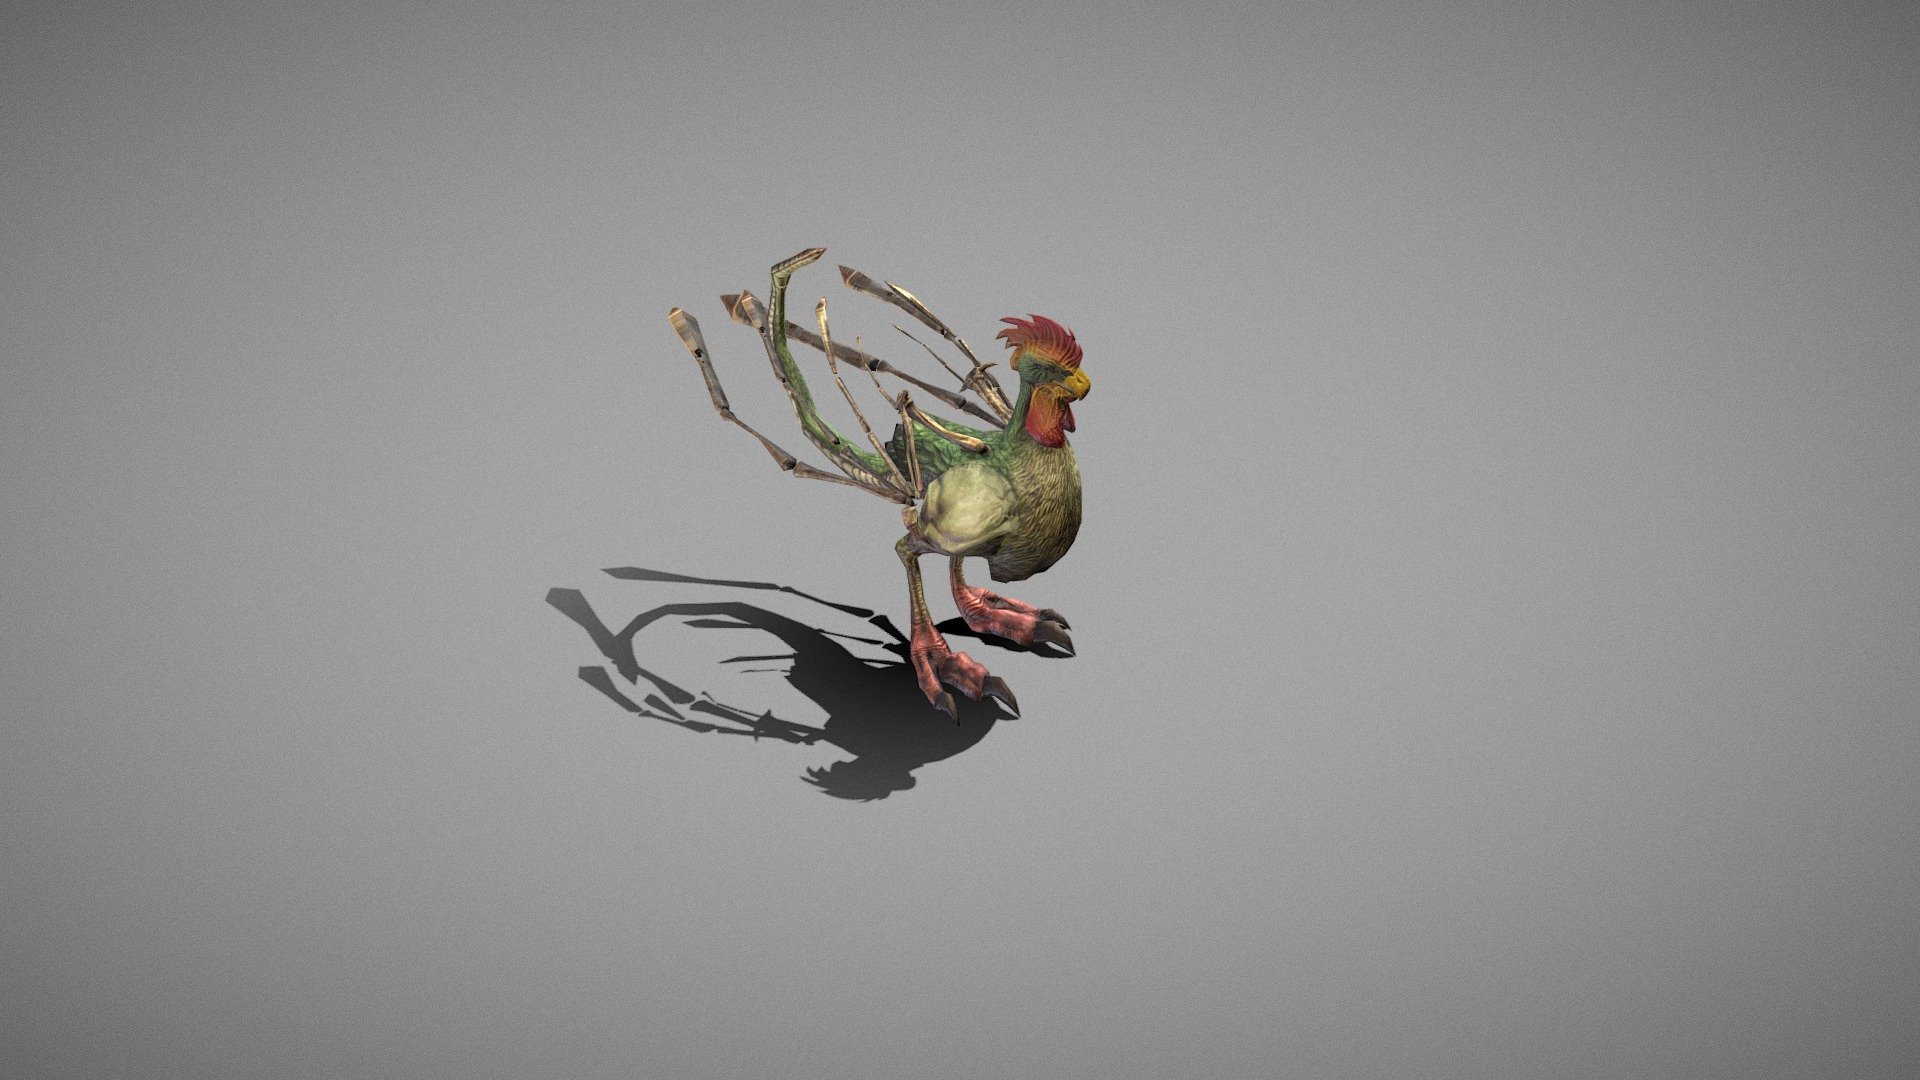 Game Prime in taiwan
An export of the rig and animations in .FBX format for directly importing to unity/unreal.

◈creature_02Basilisk

◆Mesh
   ◇Barsilisk
    Polys:3220
    Verts:2330

◆Texture: 512X512 X 2

◆Animations(x24) :
   (Animation Type_Generic)
    Attack1_0, Attack1_1,Attack1_2, Attack2_0,
    Attack2_1, Attack2_2,AttackReady, Damaged,
    Die, EnemyInSight, FallDown, FlyDie,
    FlyFallDown, Jump_Land, Jump_Mid, Jump_Takeoff,
    Nonbattle, Nonbattle_Idle, RollFallDown,
    RollStand, RunF, Sleep, StandUp, WalkF - 02_RPG MONSTER Basilisk_Game Prime - 3D model by GAME_PRIME 3d model